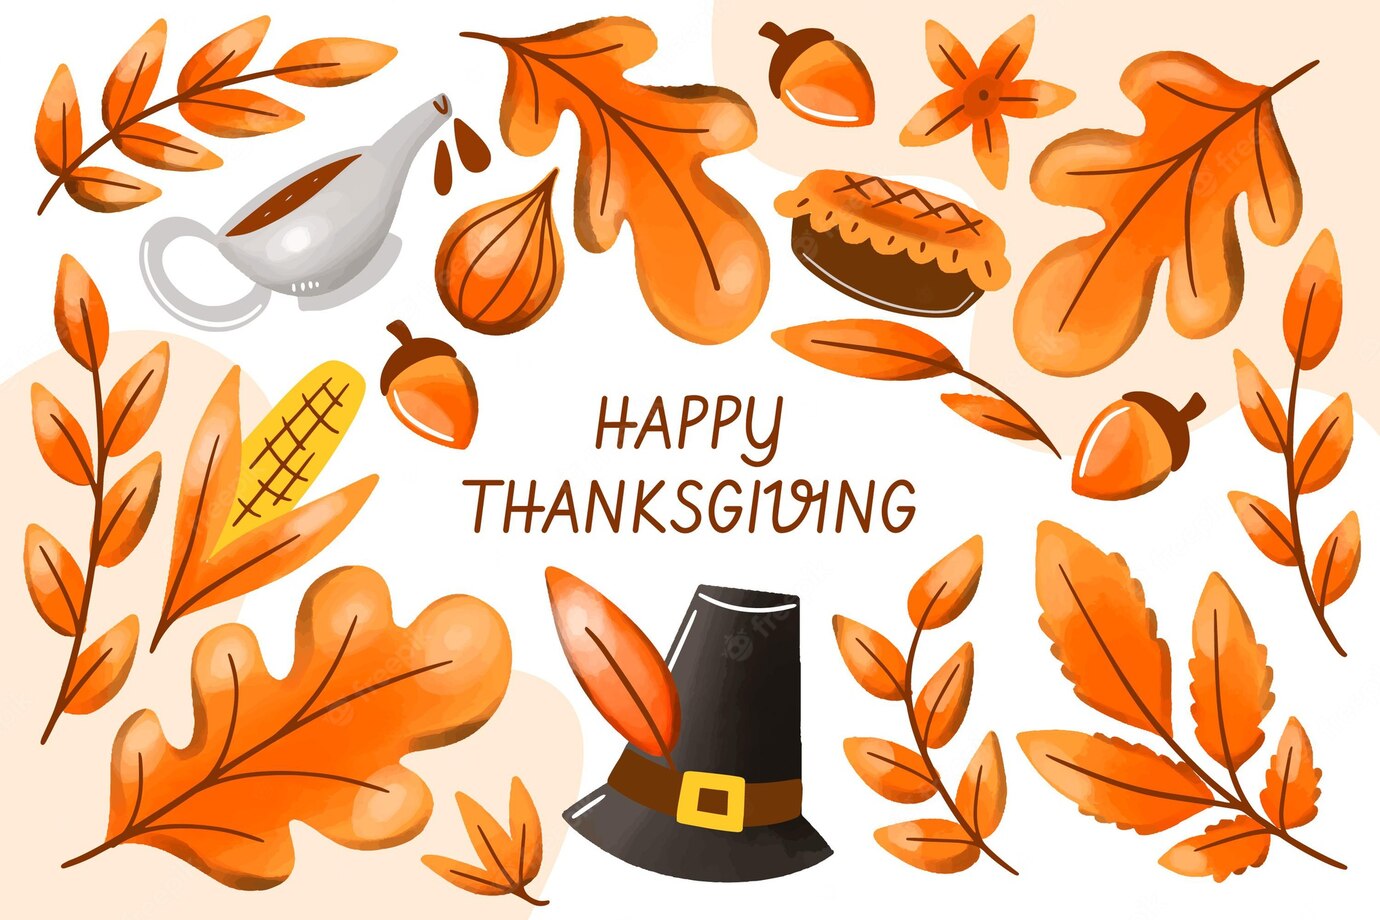 Thanksgiving Background With Leaves 52683 47295